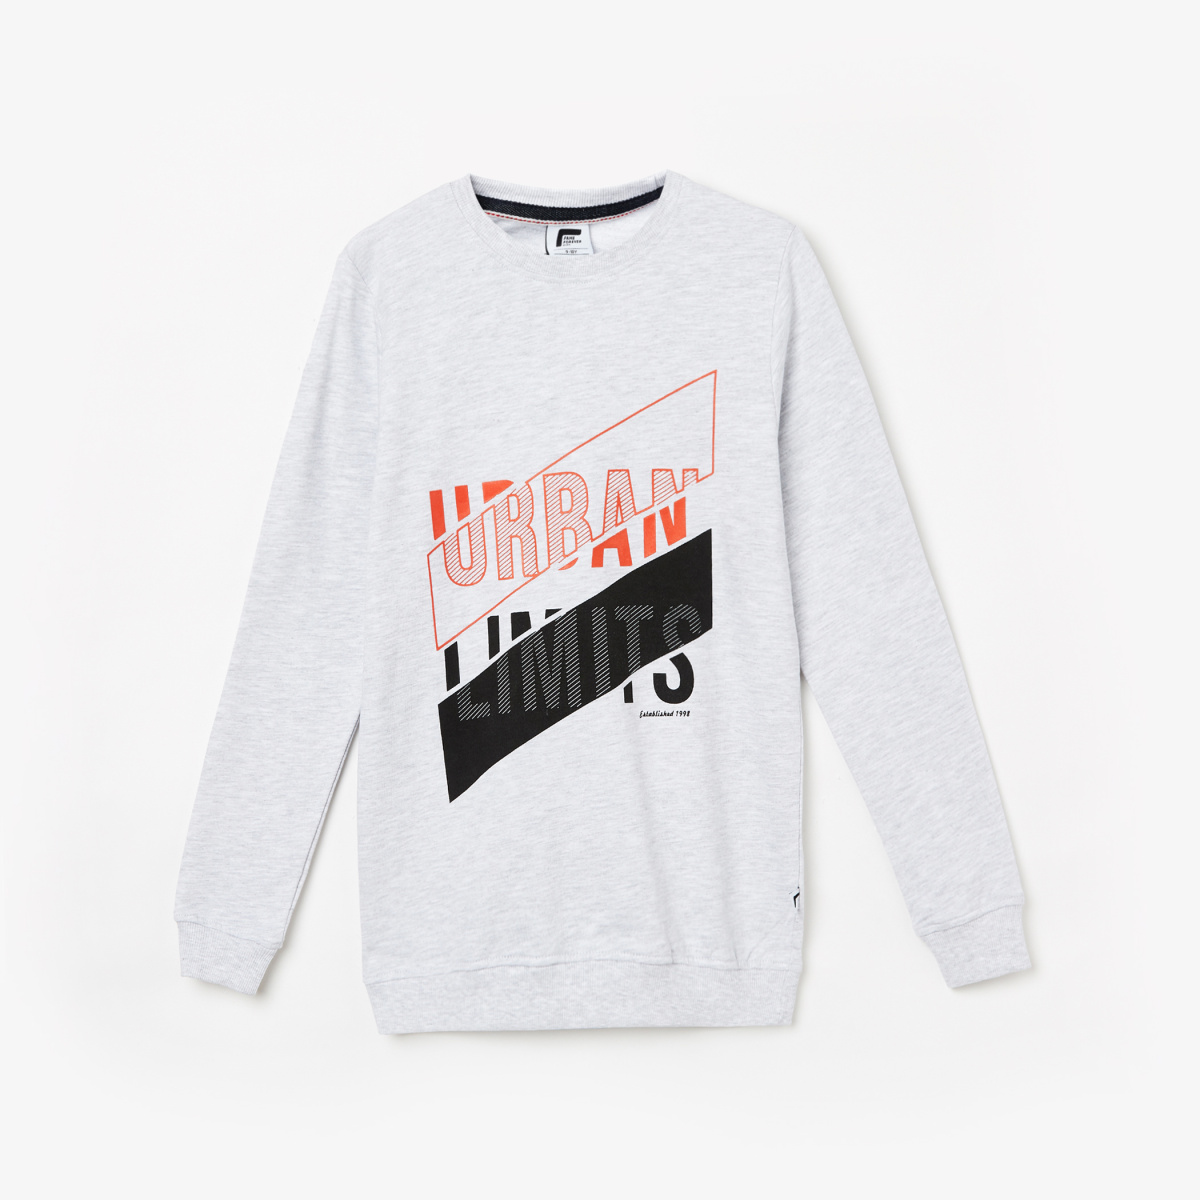 FAME FOREVER YOUNG Boys Printed Sweat Shirt